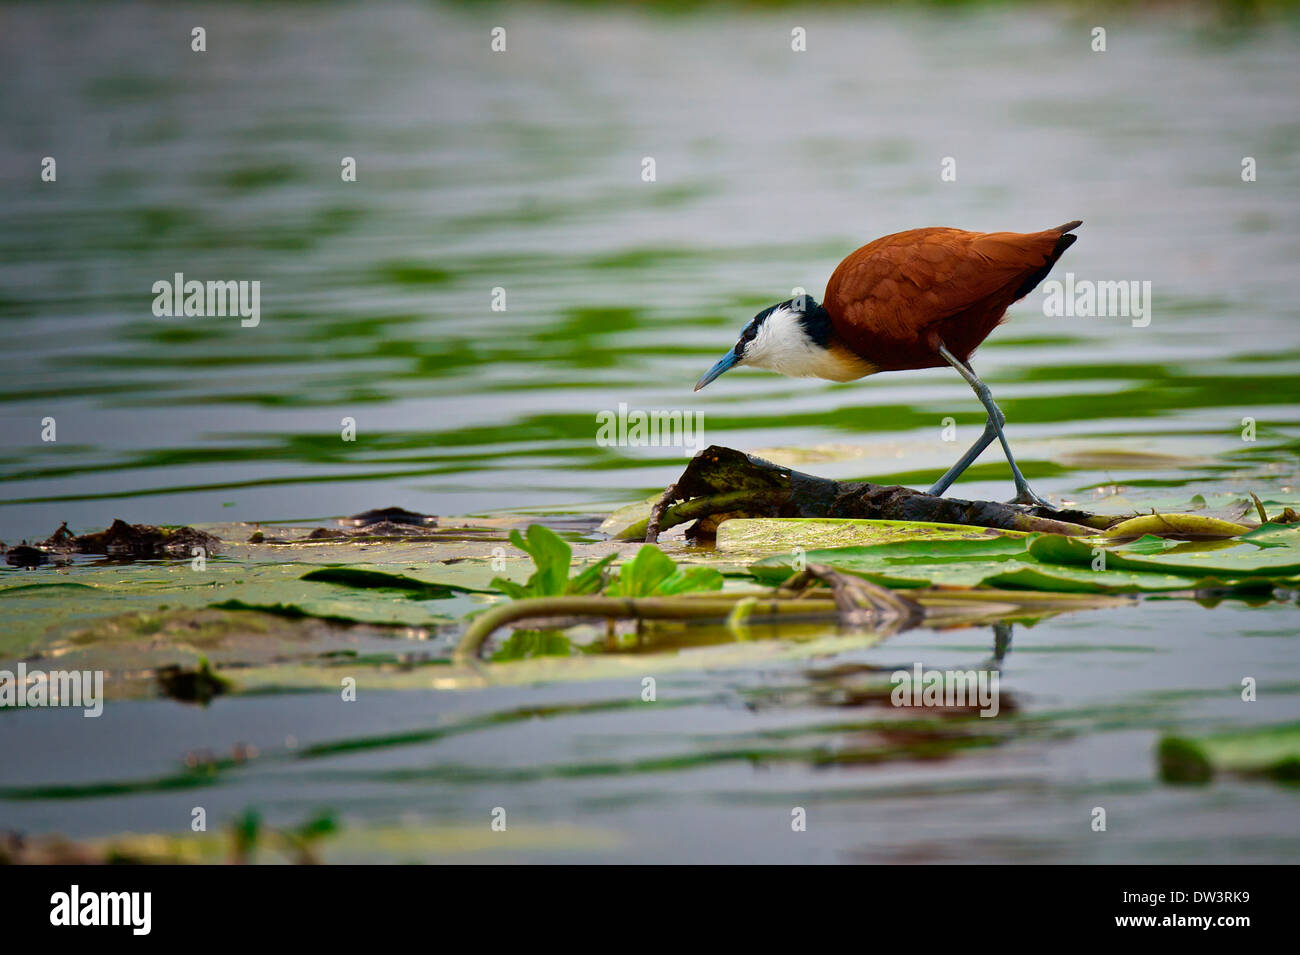 A native wader, the African Jacana (Actophilornis africanus) walks across lily pads in a Ugandan swamp, its natural habitat. Stock Photo